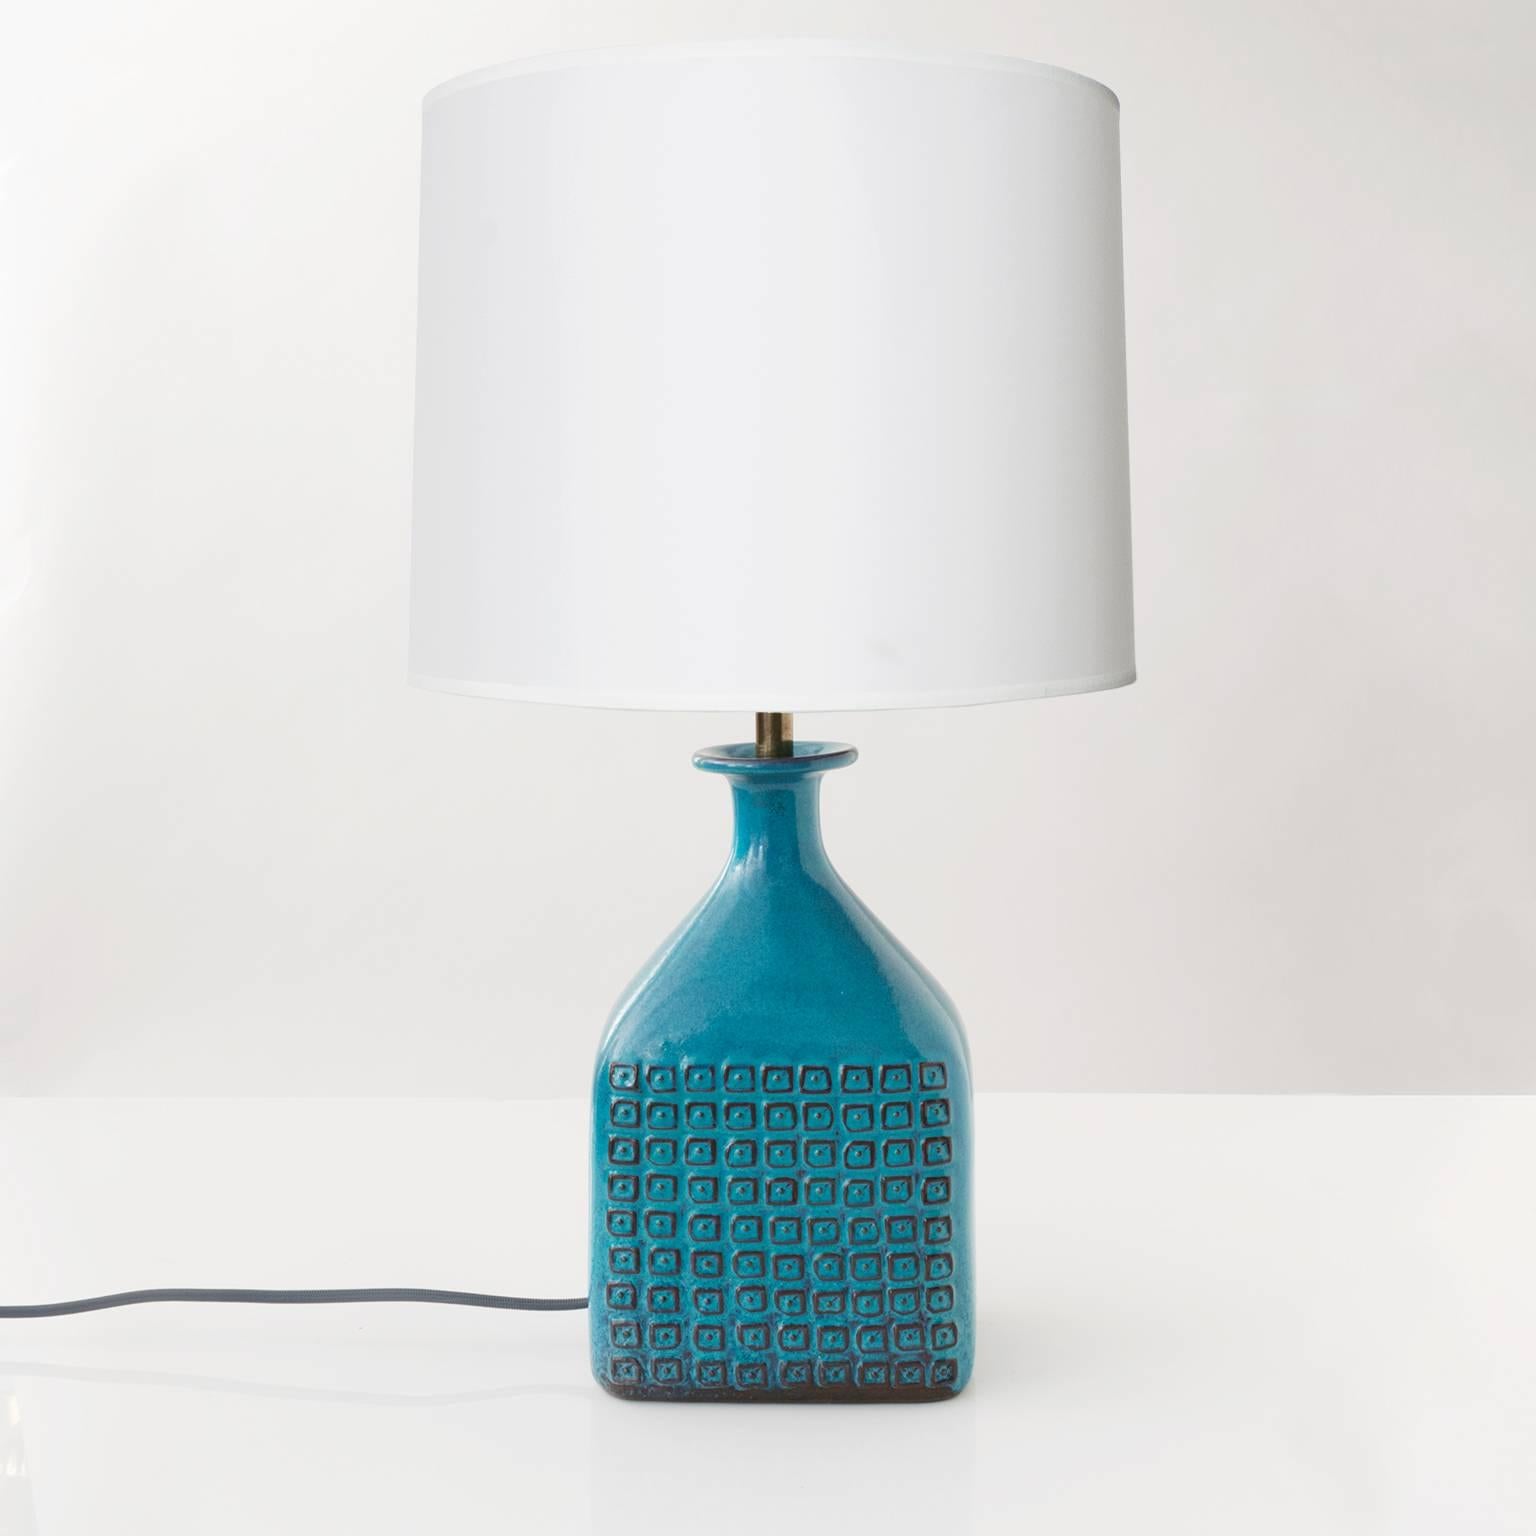 Scandinavian Modern unique ceramic lamp by Stig Lindberg for Gustavsberg Studio. Lamp has a lovely turquoise glaze and a grid of dotted squares on it's front and back facades. Newly rewired with custom patinated brass stem and double cluster,